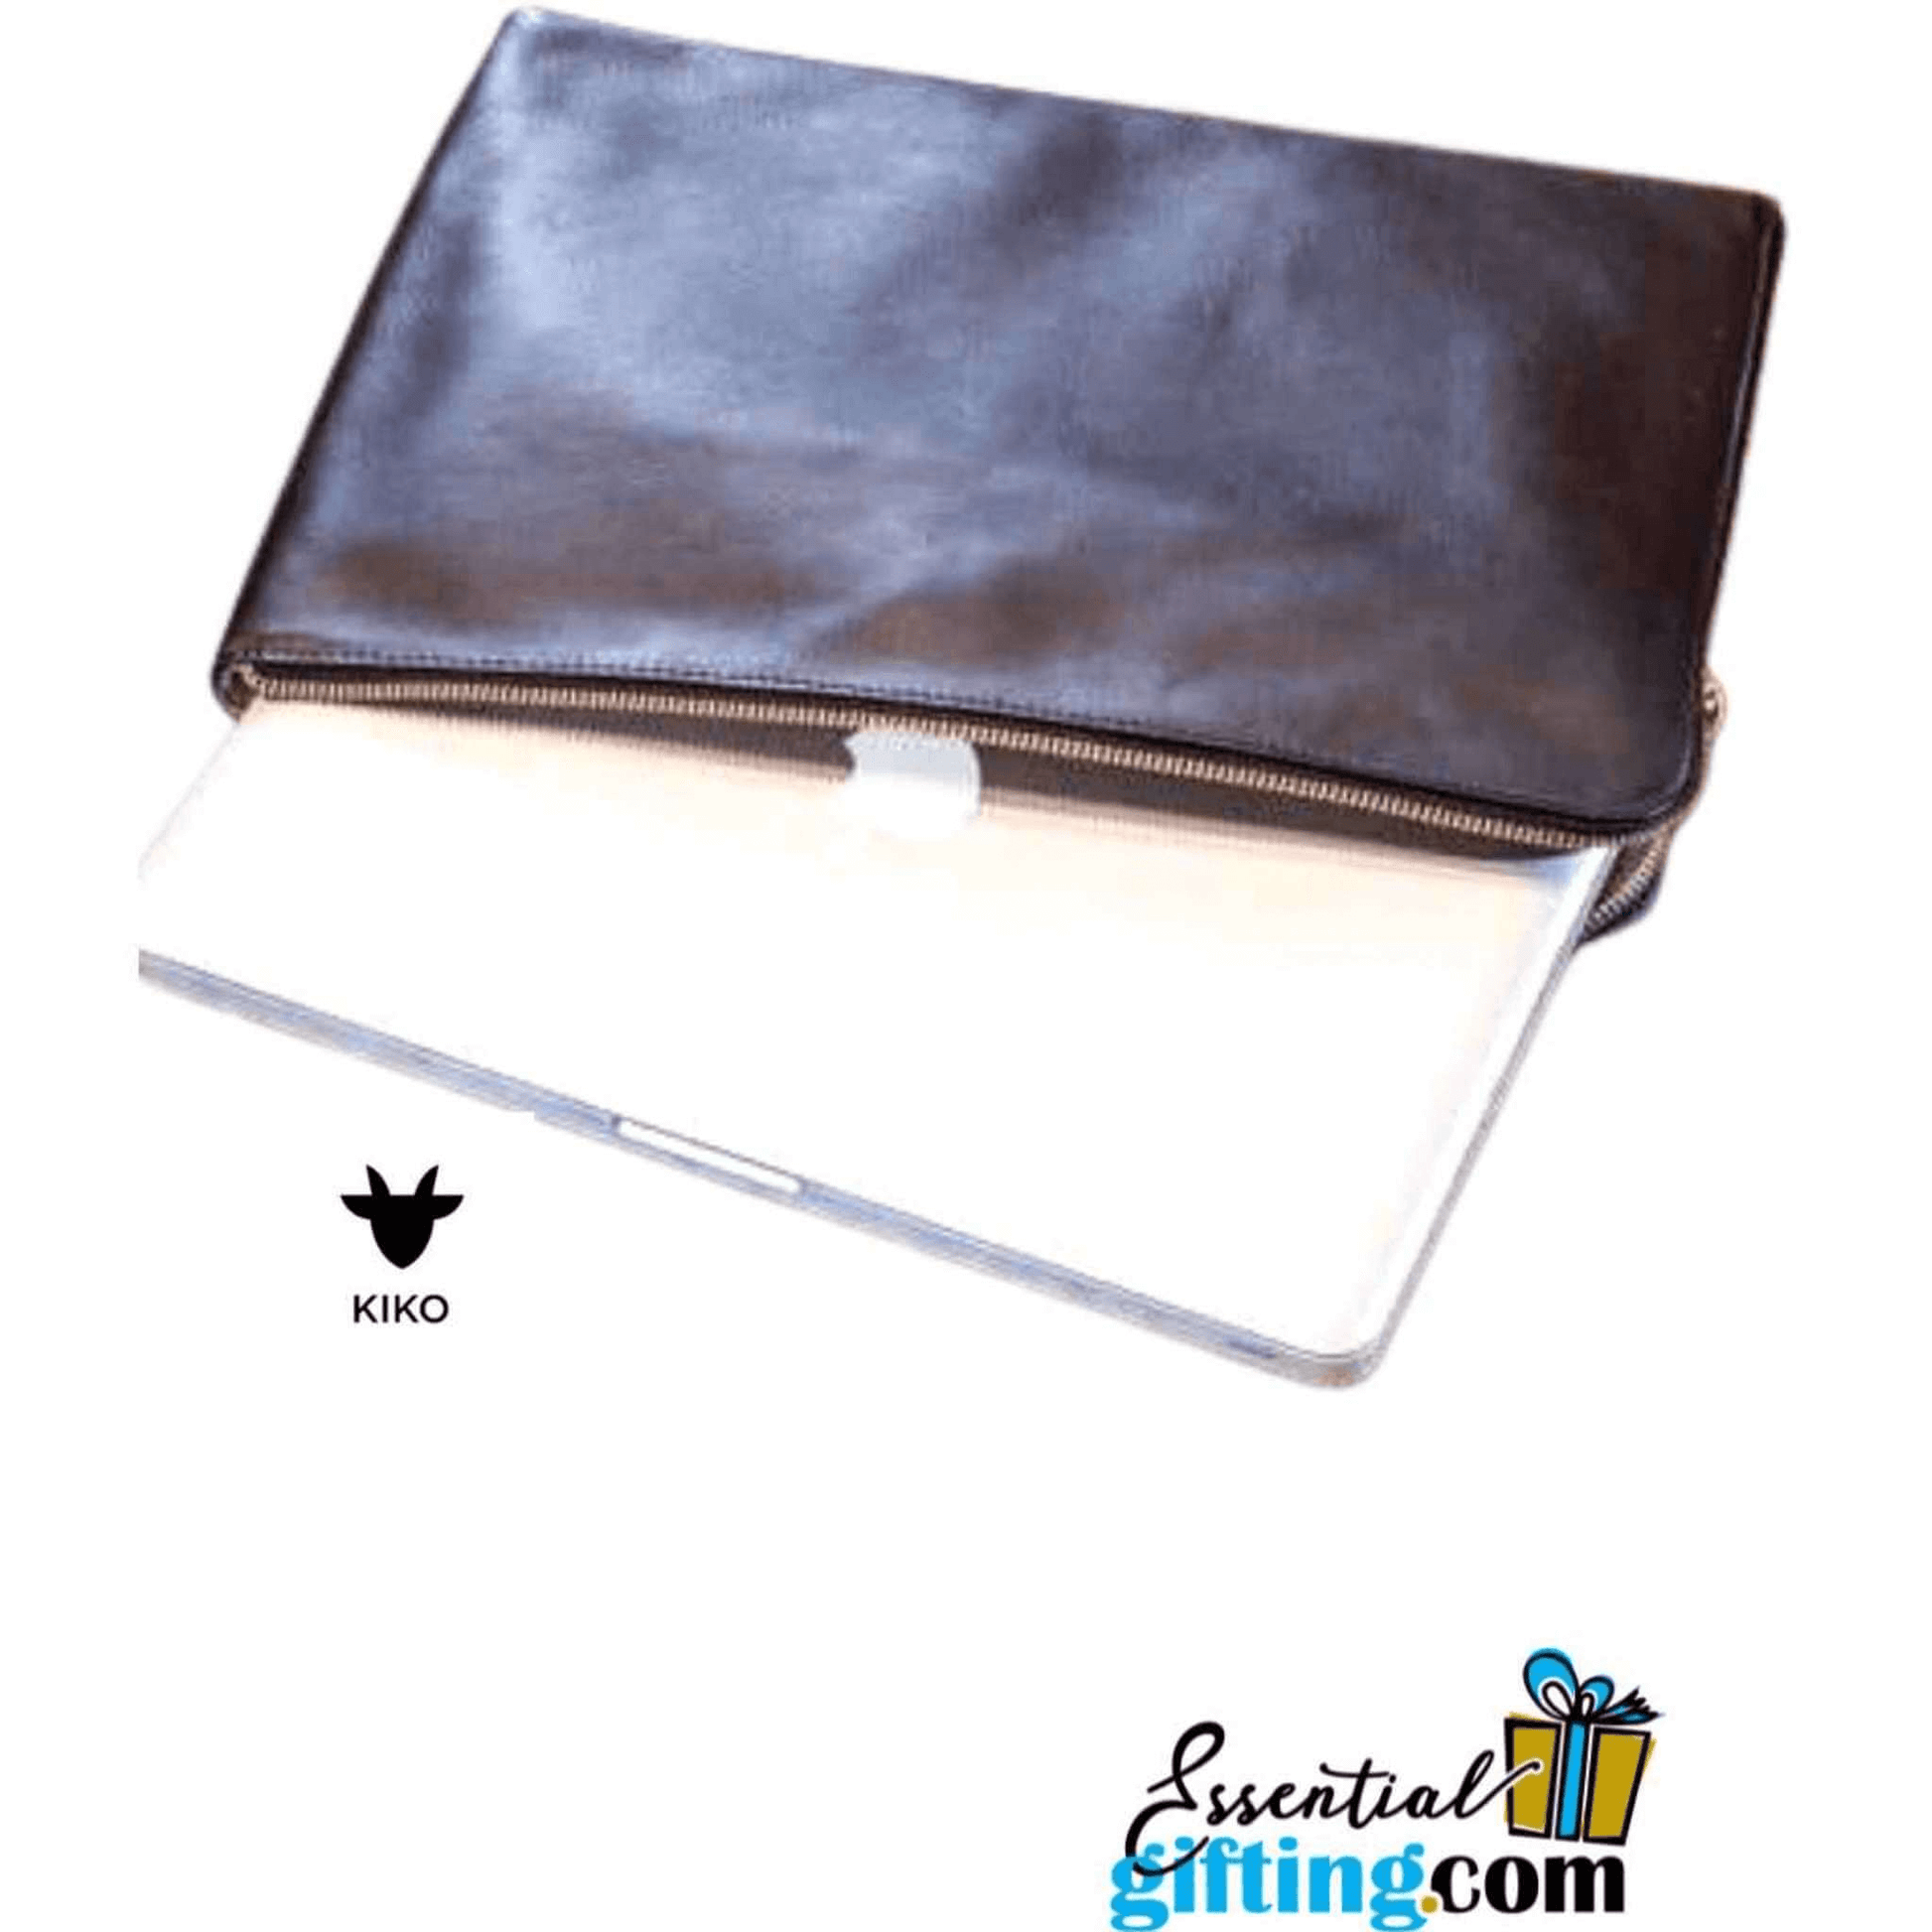 Sleek leather laptop folio with zippered closure, ideal for modern professionals.